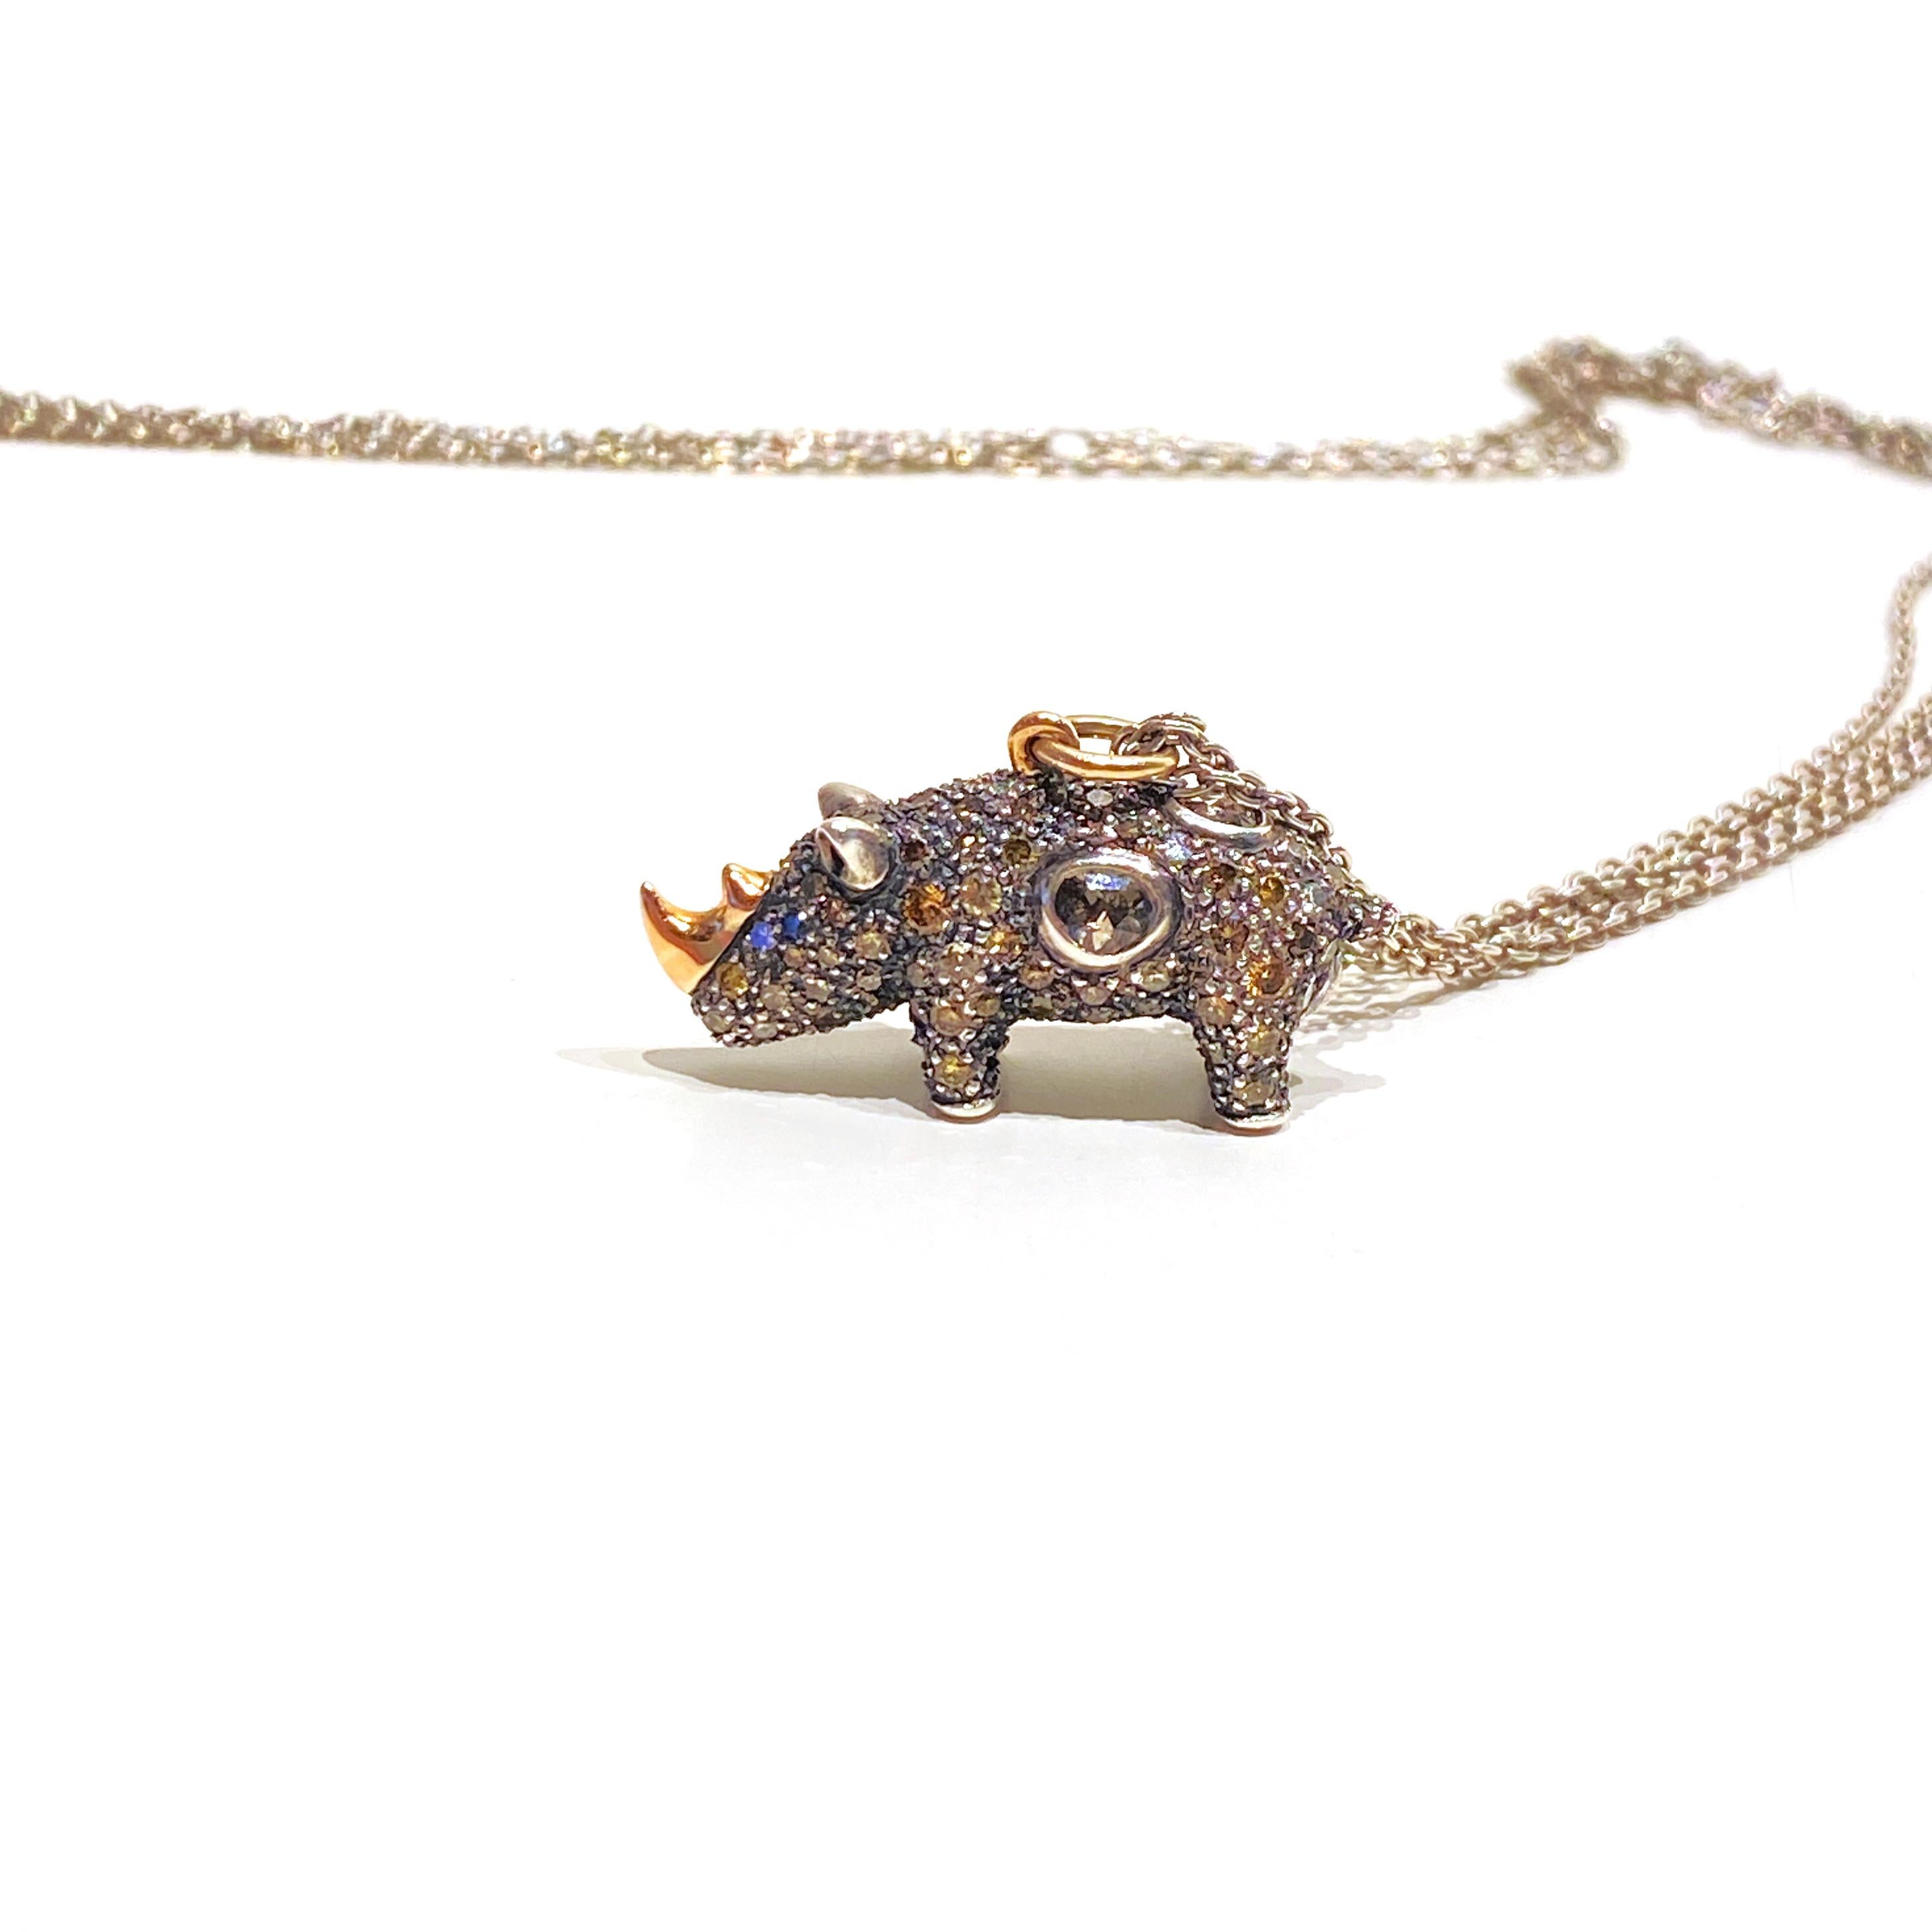 Inspired by the beauty of imperfection, Bibi van der Velden sculpts exotic materials into one-of-a-kind jewelry evoking her respect for our natural world.

This necklace has a playful rhino with brown diamonds, white diamonds, rose-cut diamonds, and